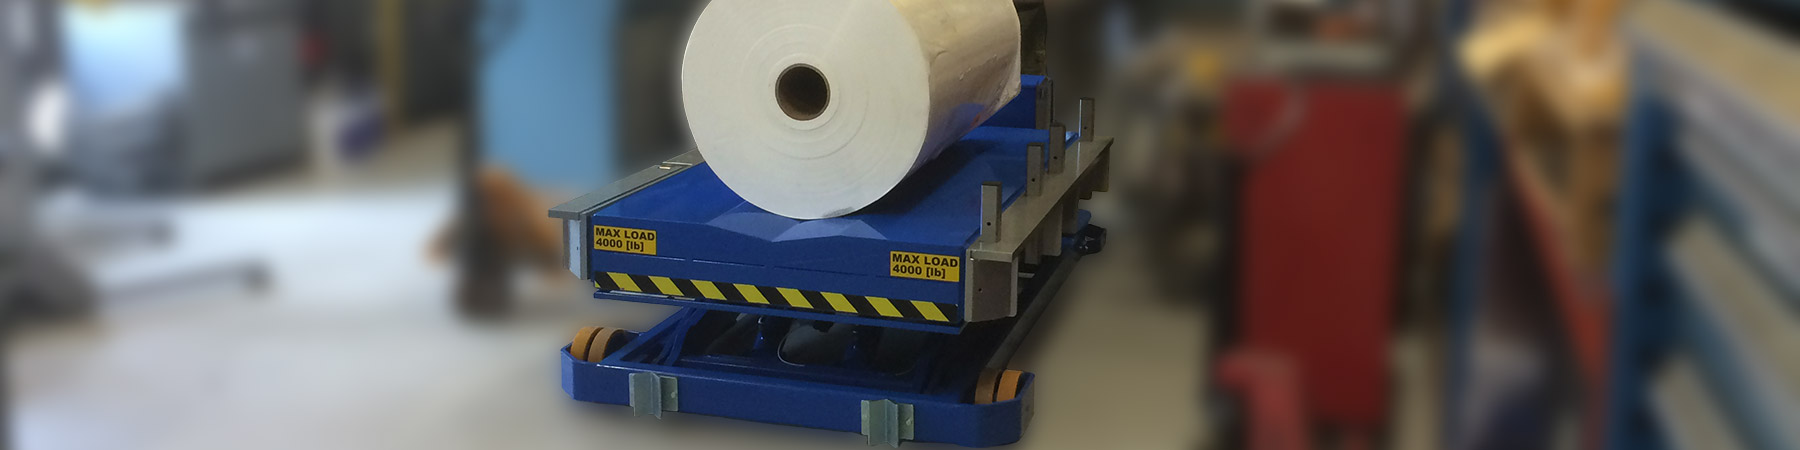 Portable Lifter for Paper Rolls